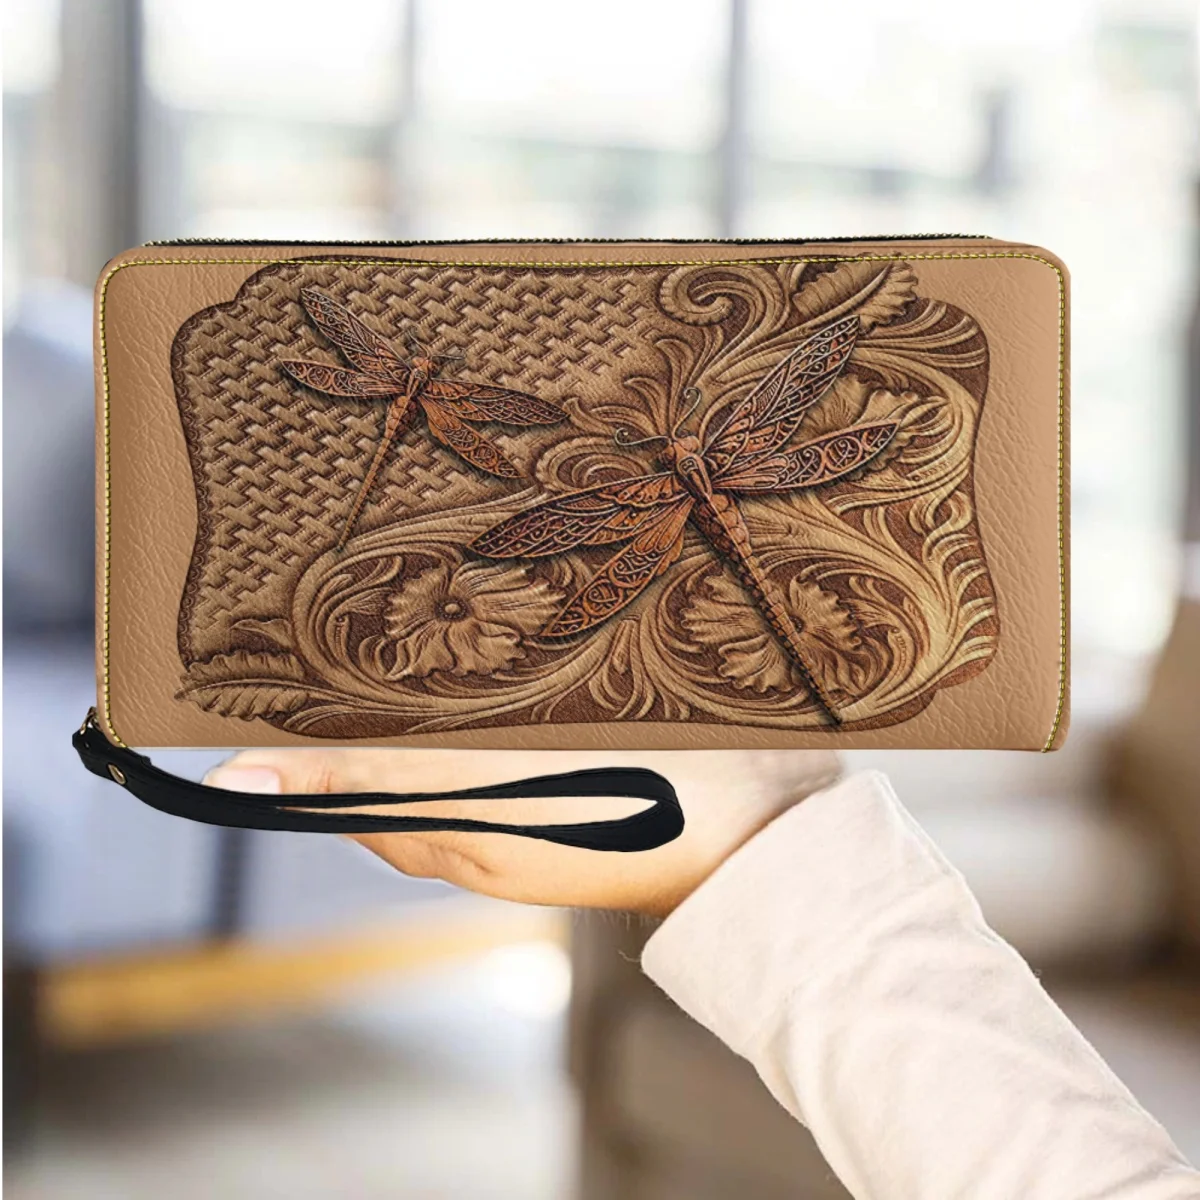 

Personalized Vintage Dragonfly Design Ladies Clutch Fashion Portable Long Wrist Zipper Wallet Travel Party Commuter Card Holder